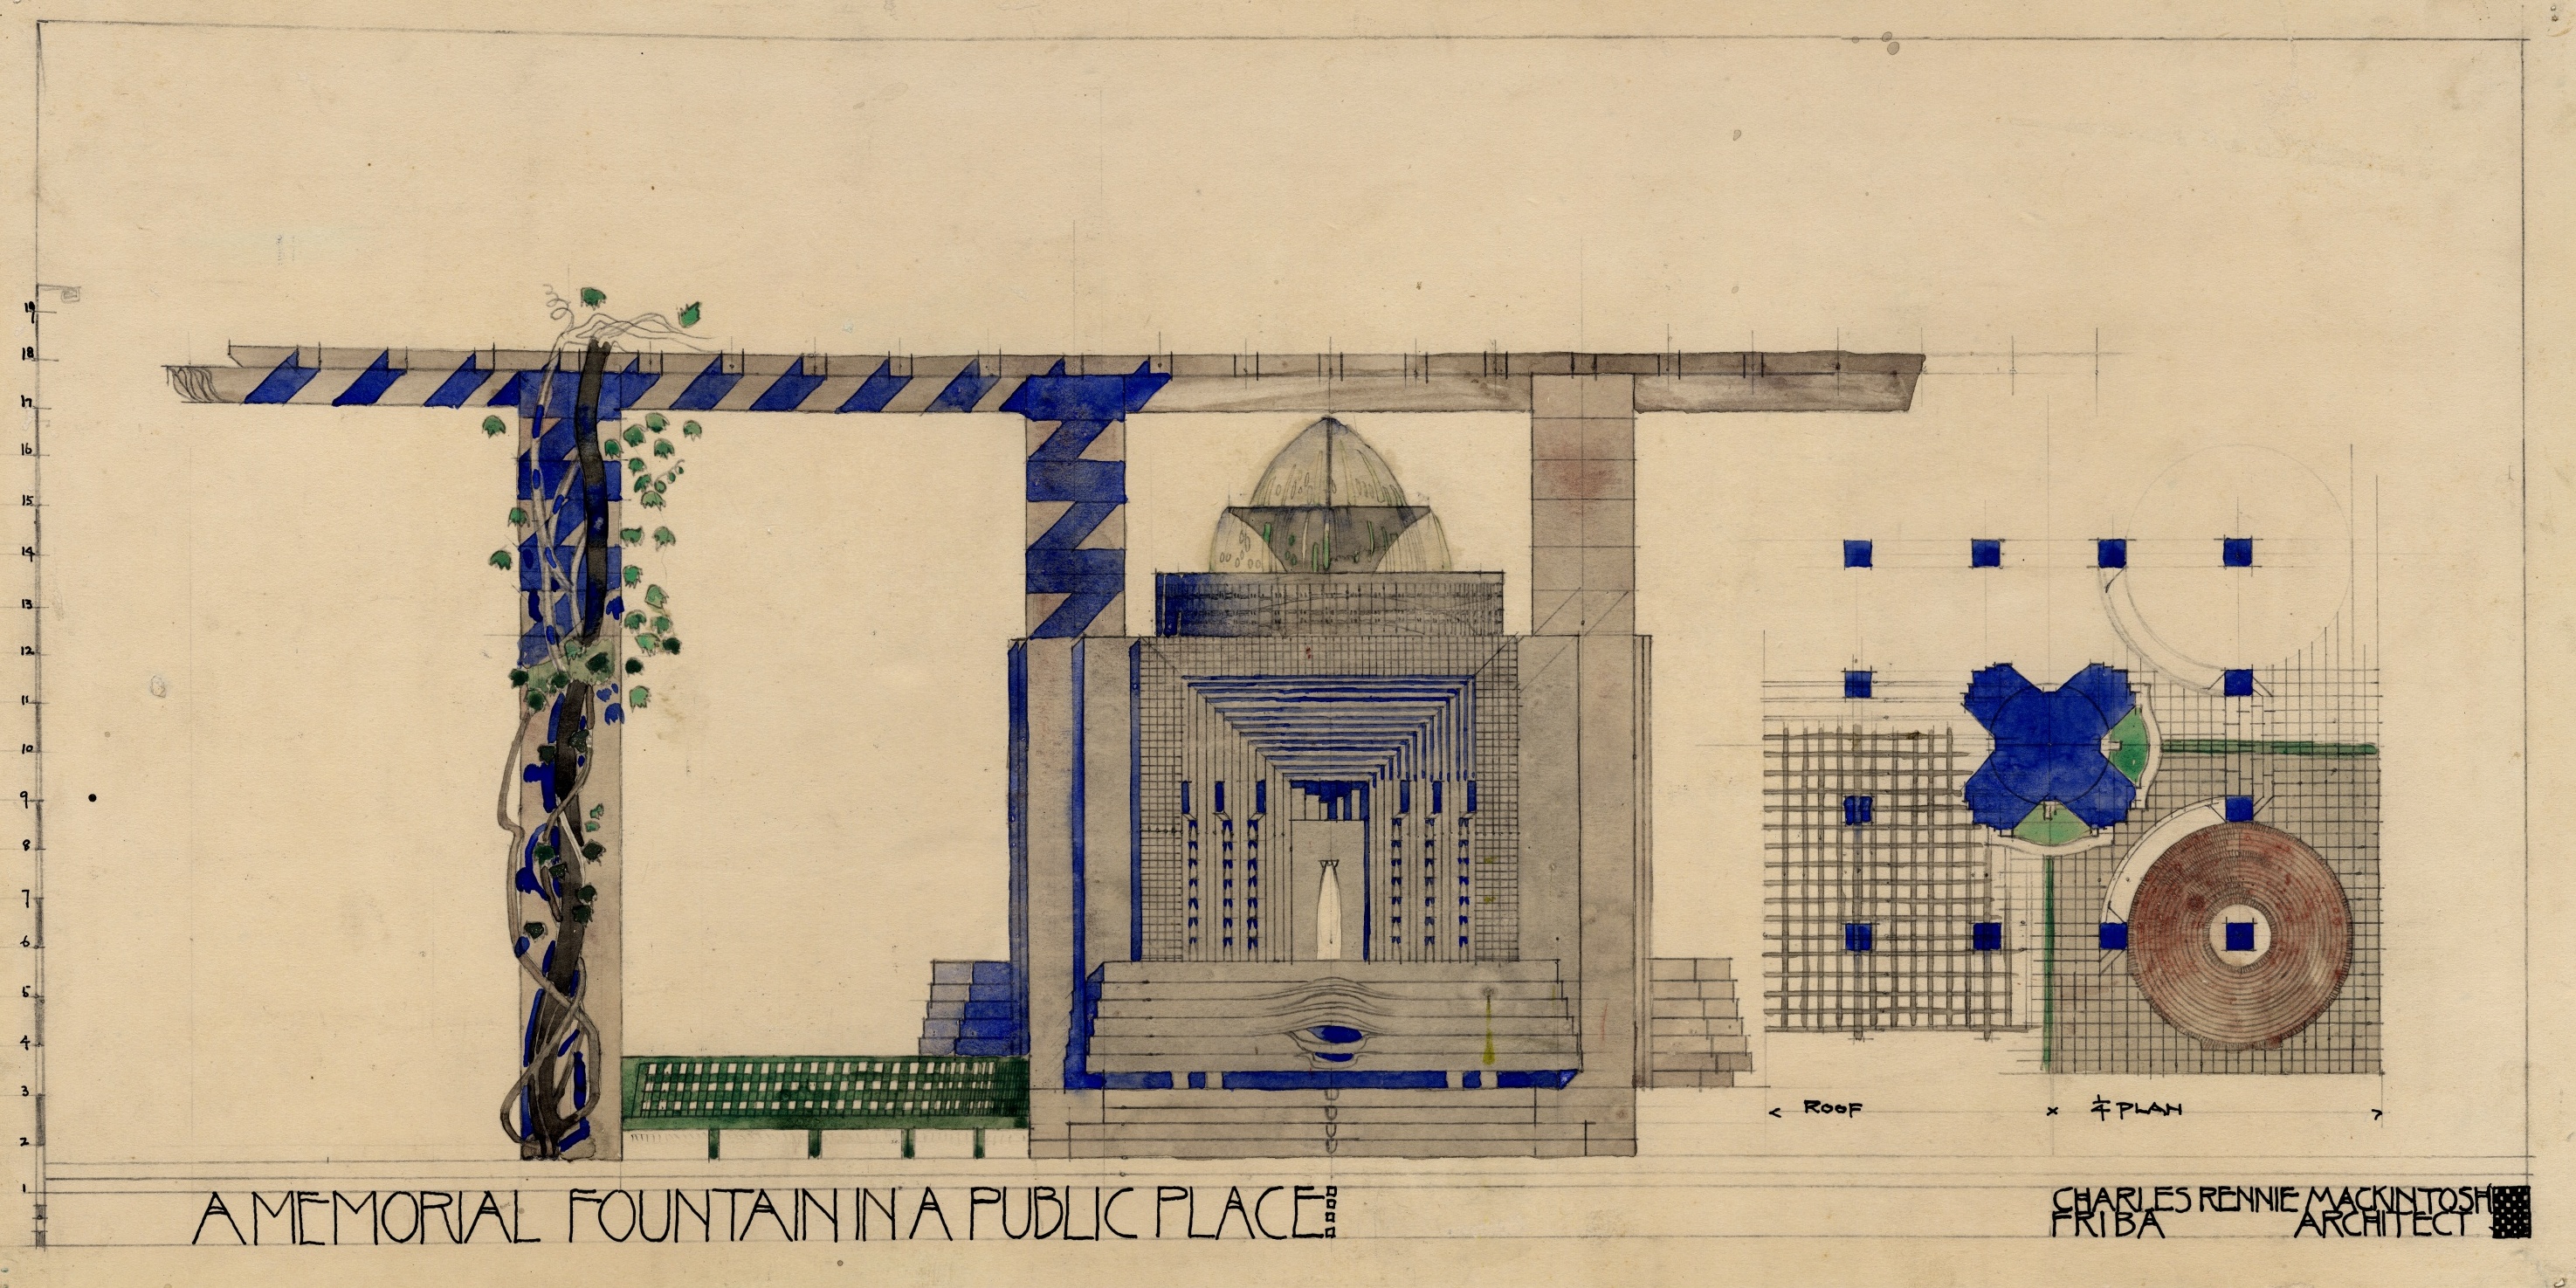 Charles Rennie Mackintosh. Design for a memorial fountain in a public place. [?1915–6]. Source: University of Glasgow